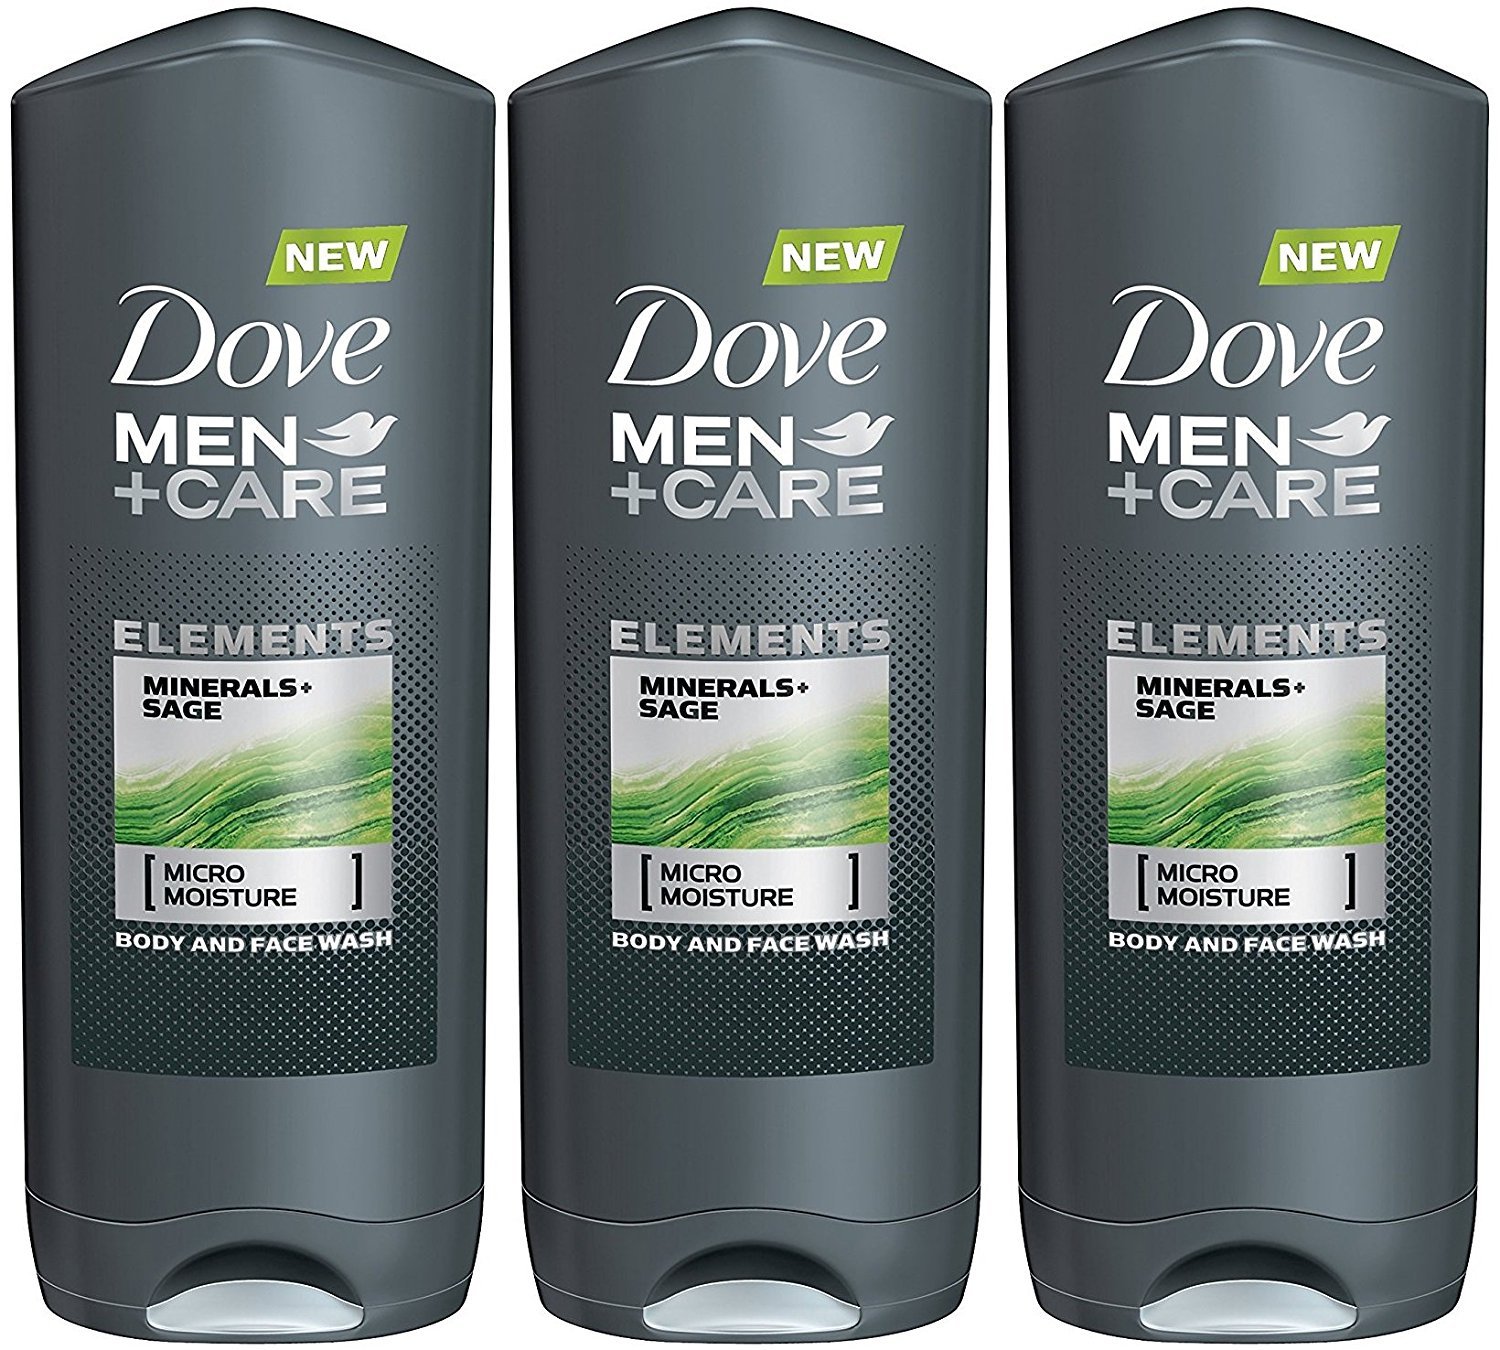 Dove Men + Care Elements Body Wash - Minerals and Sage - 13.5 Ounce (Pack of 3)